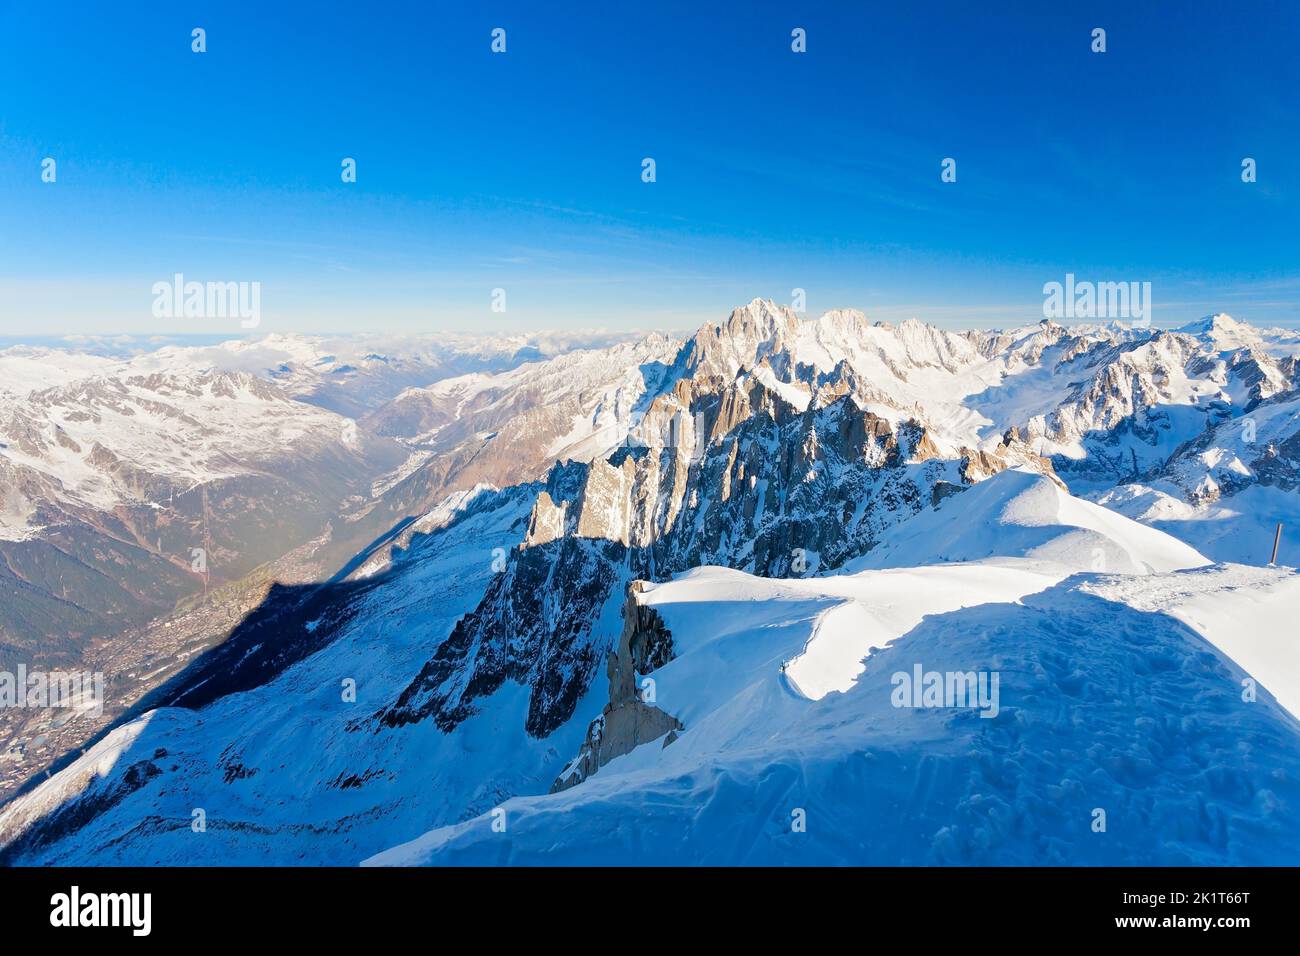 The Aiguille du Midi (3,842 m), mountain in the Mont Blanc massif, french Alps, France Stock Photo